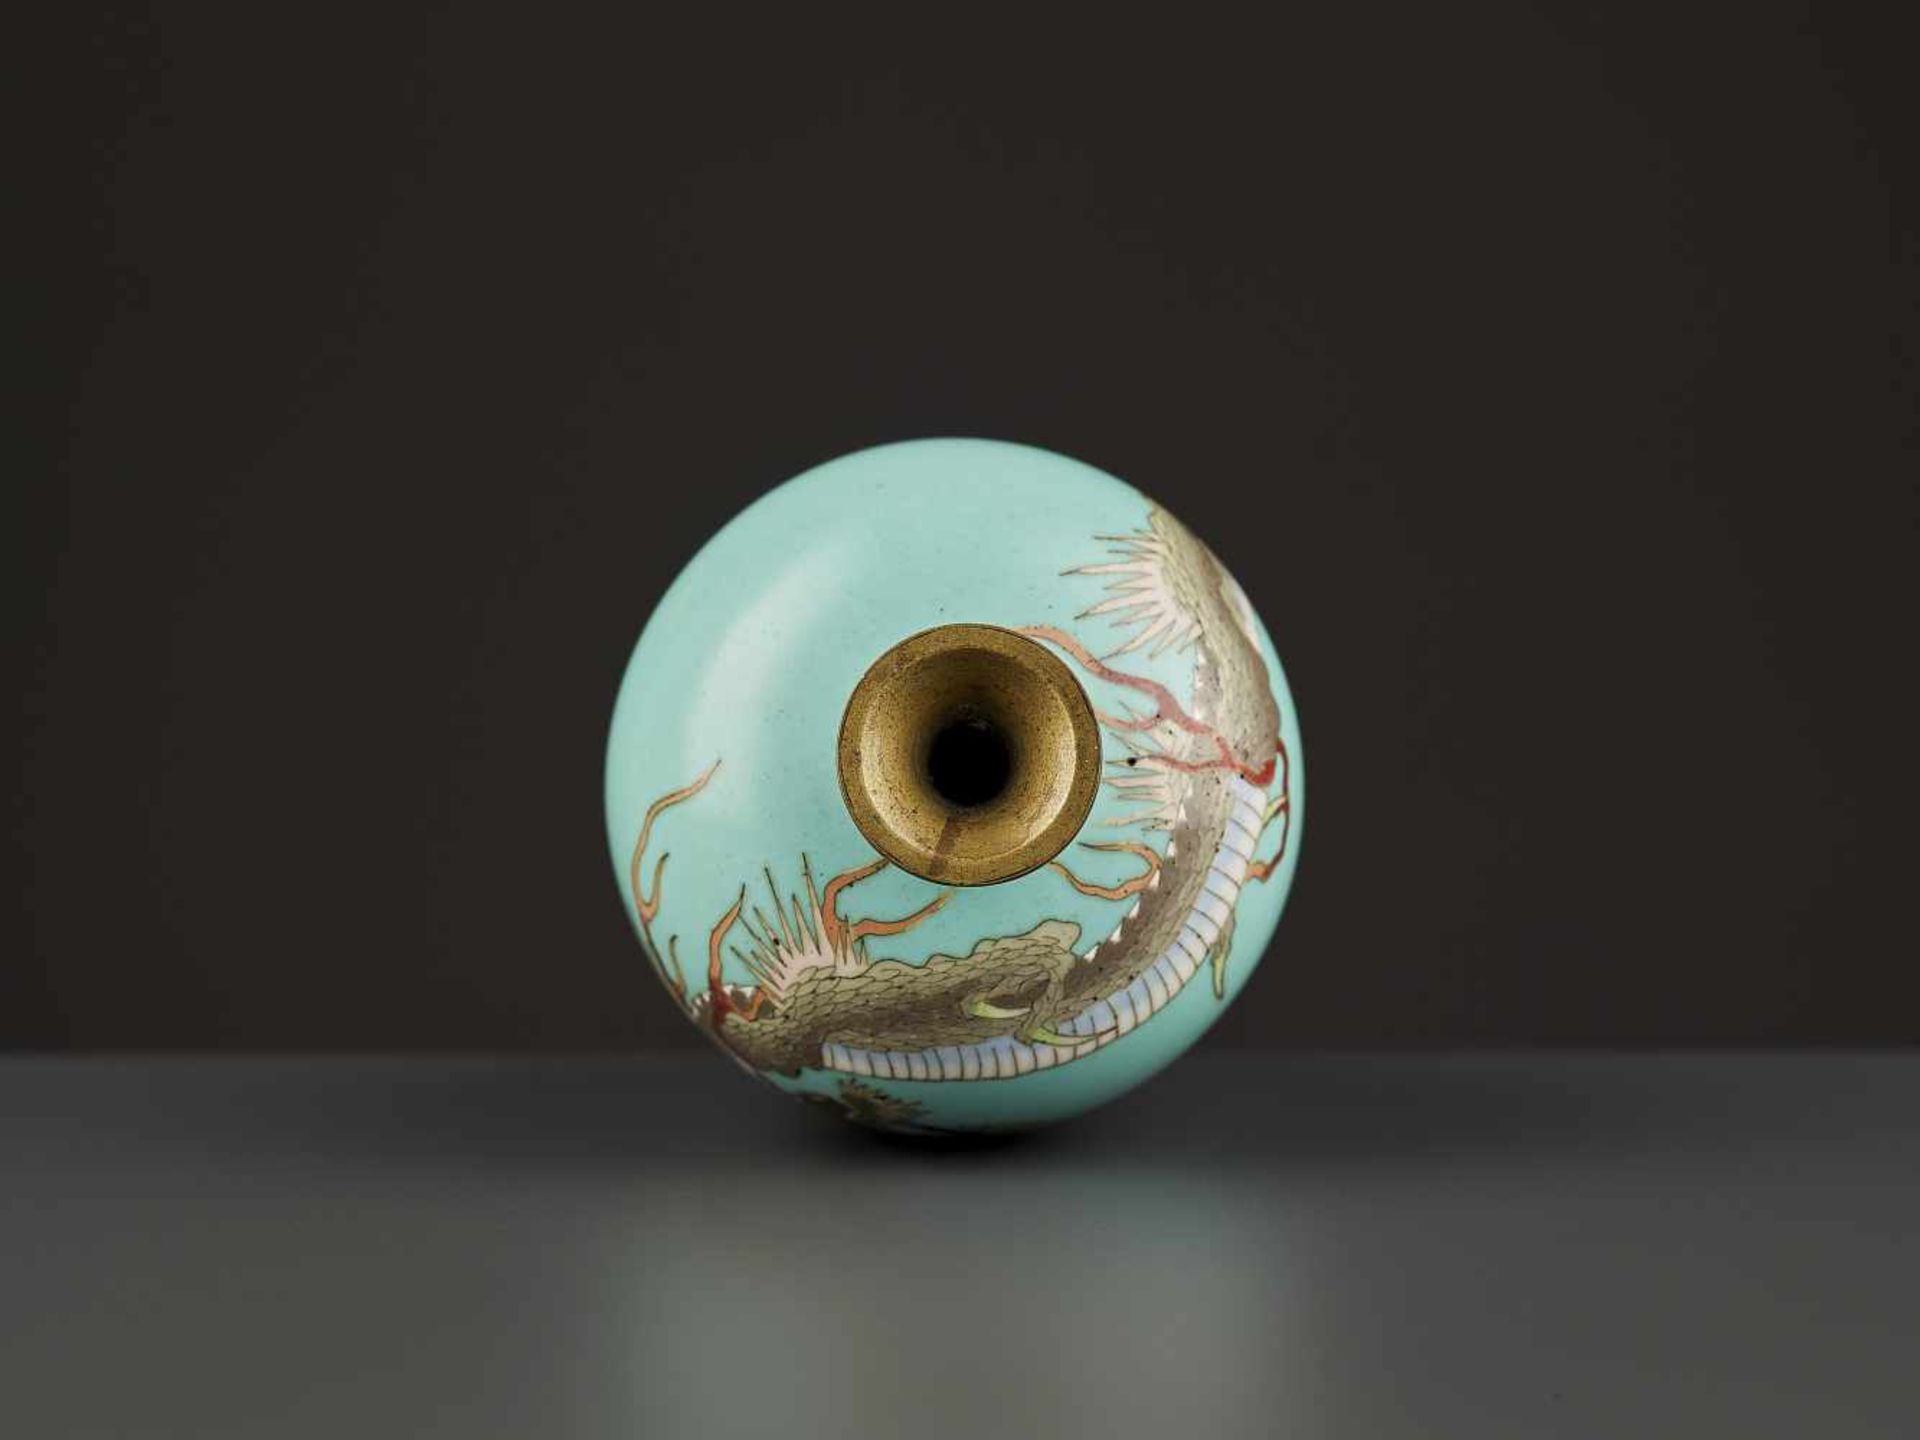 A SMALL DRAGON CLOISONNÉ VASE Japan, Meiji period (1868-1912). Finely enameled to depict a sinuous - Image 6 of 7